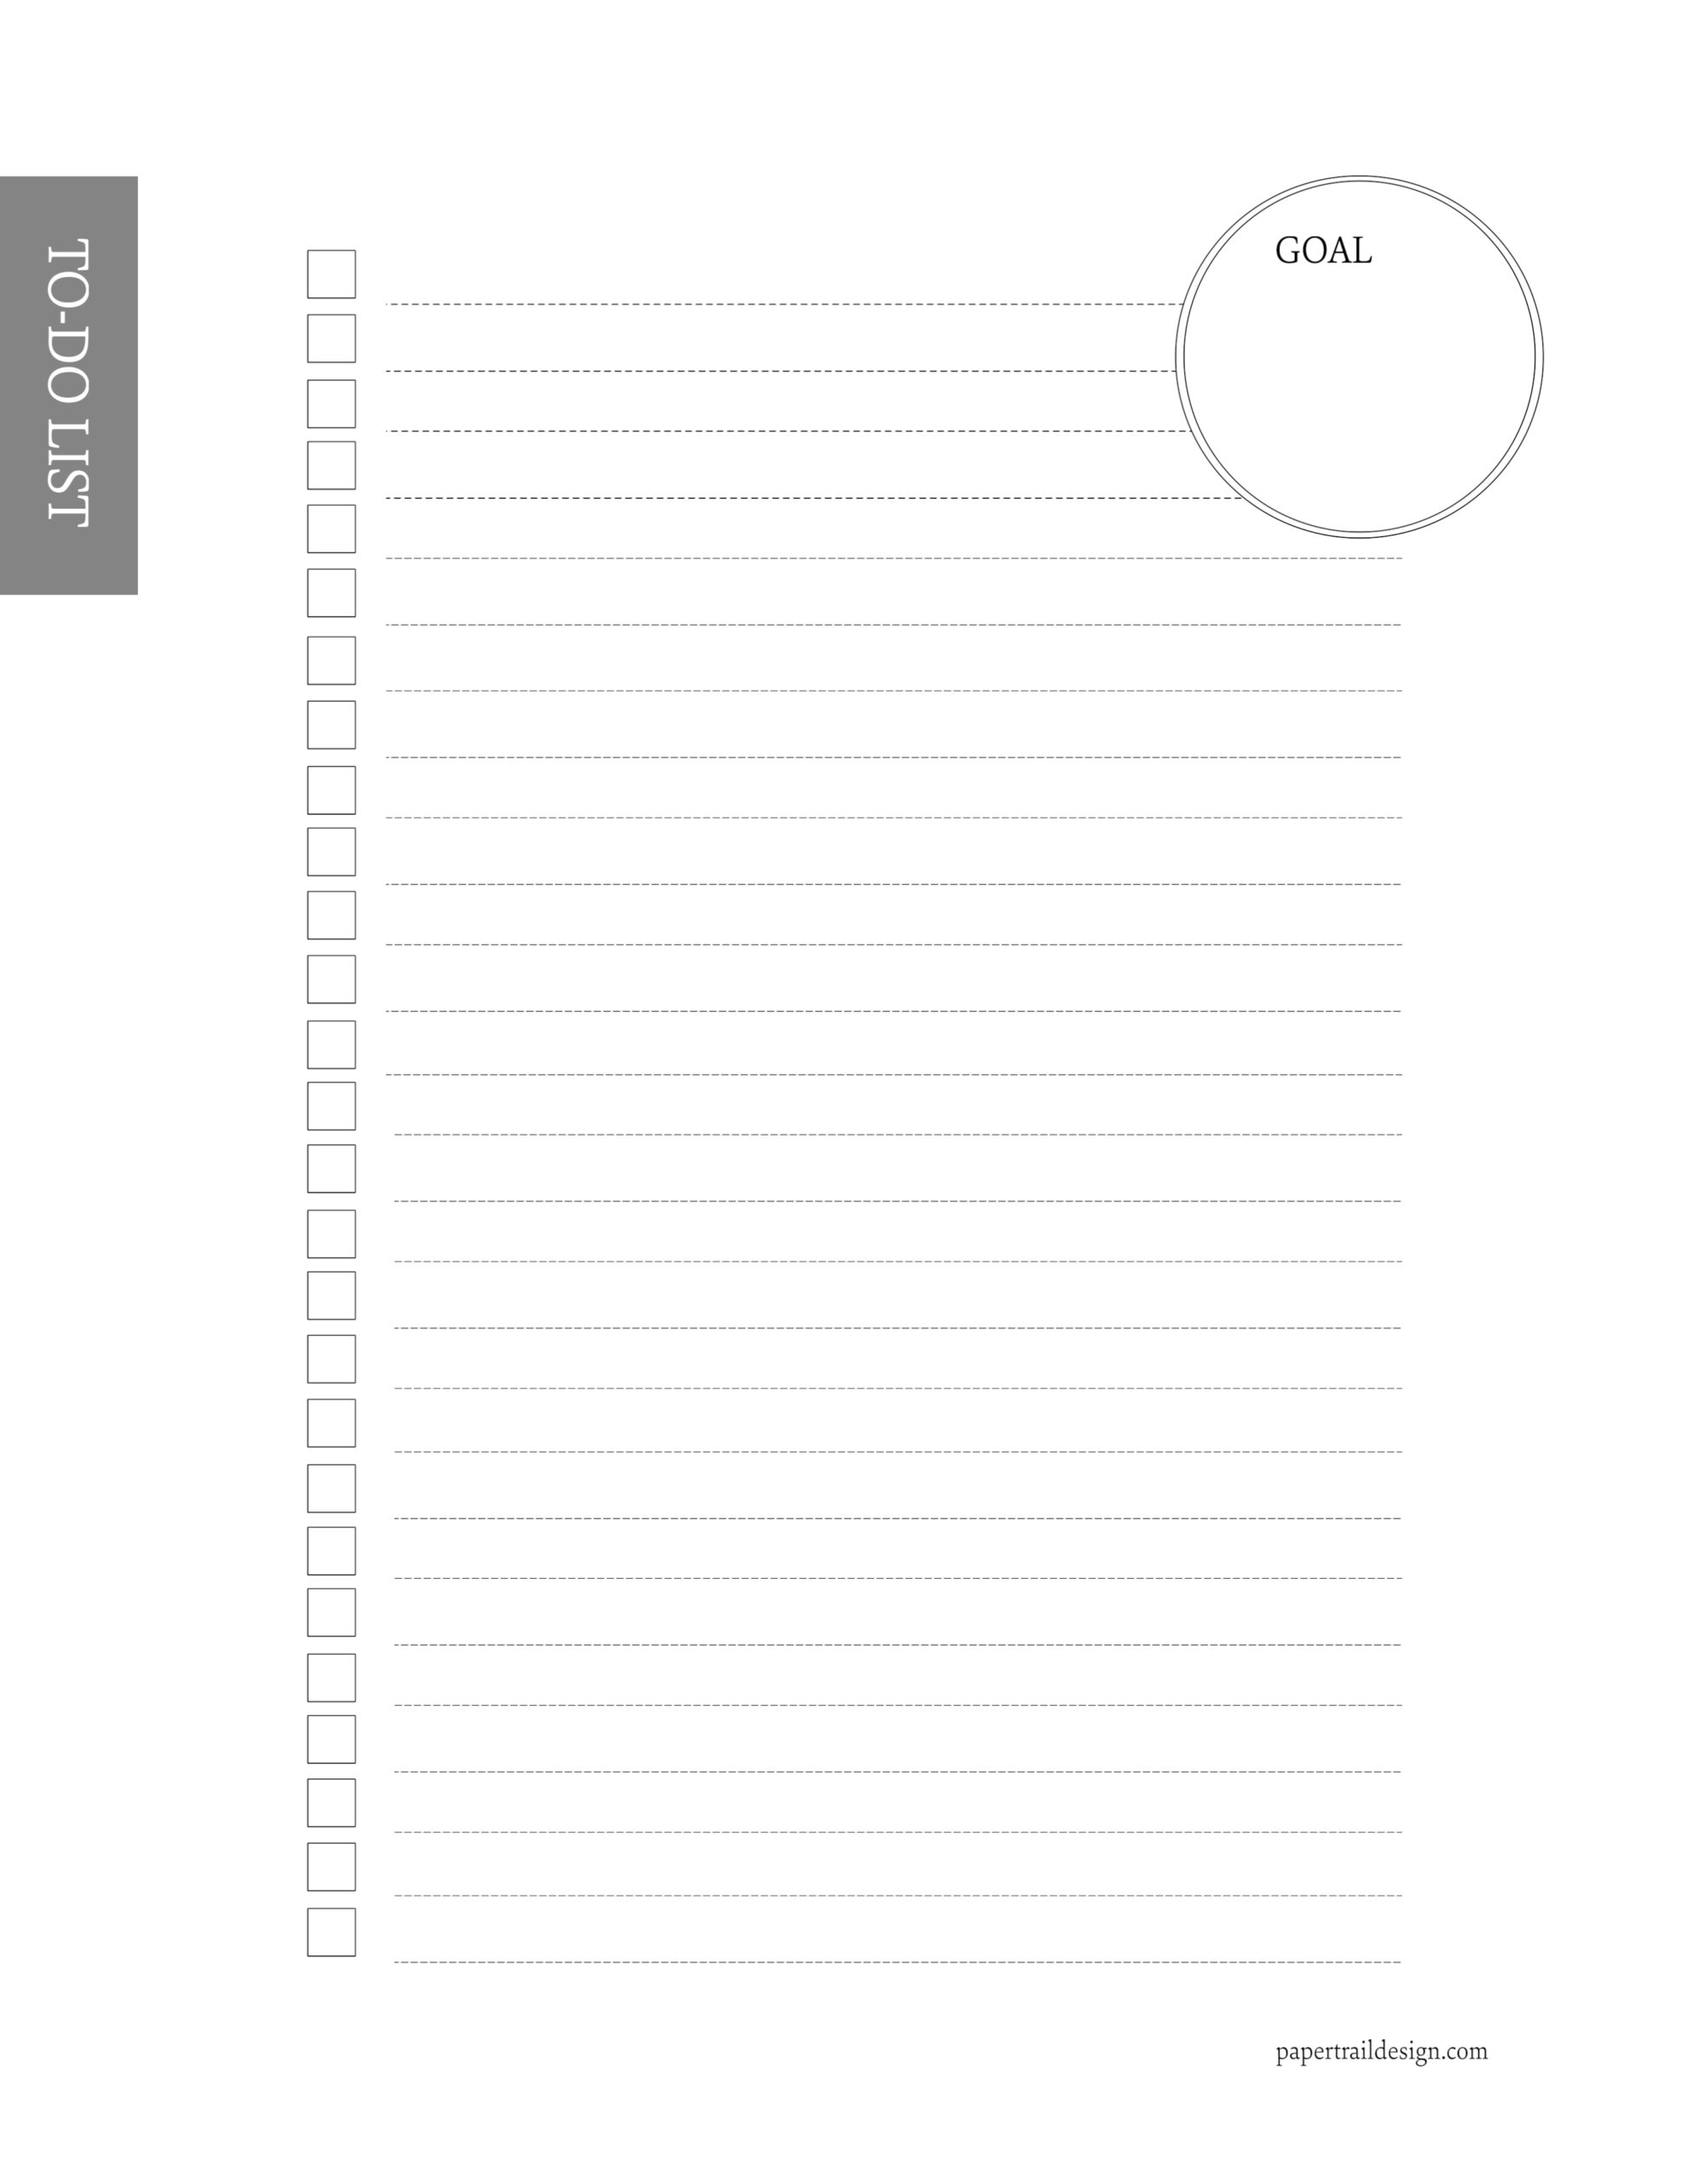 Free To-Do List Printable Template - Paper Trail Design